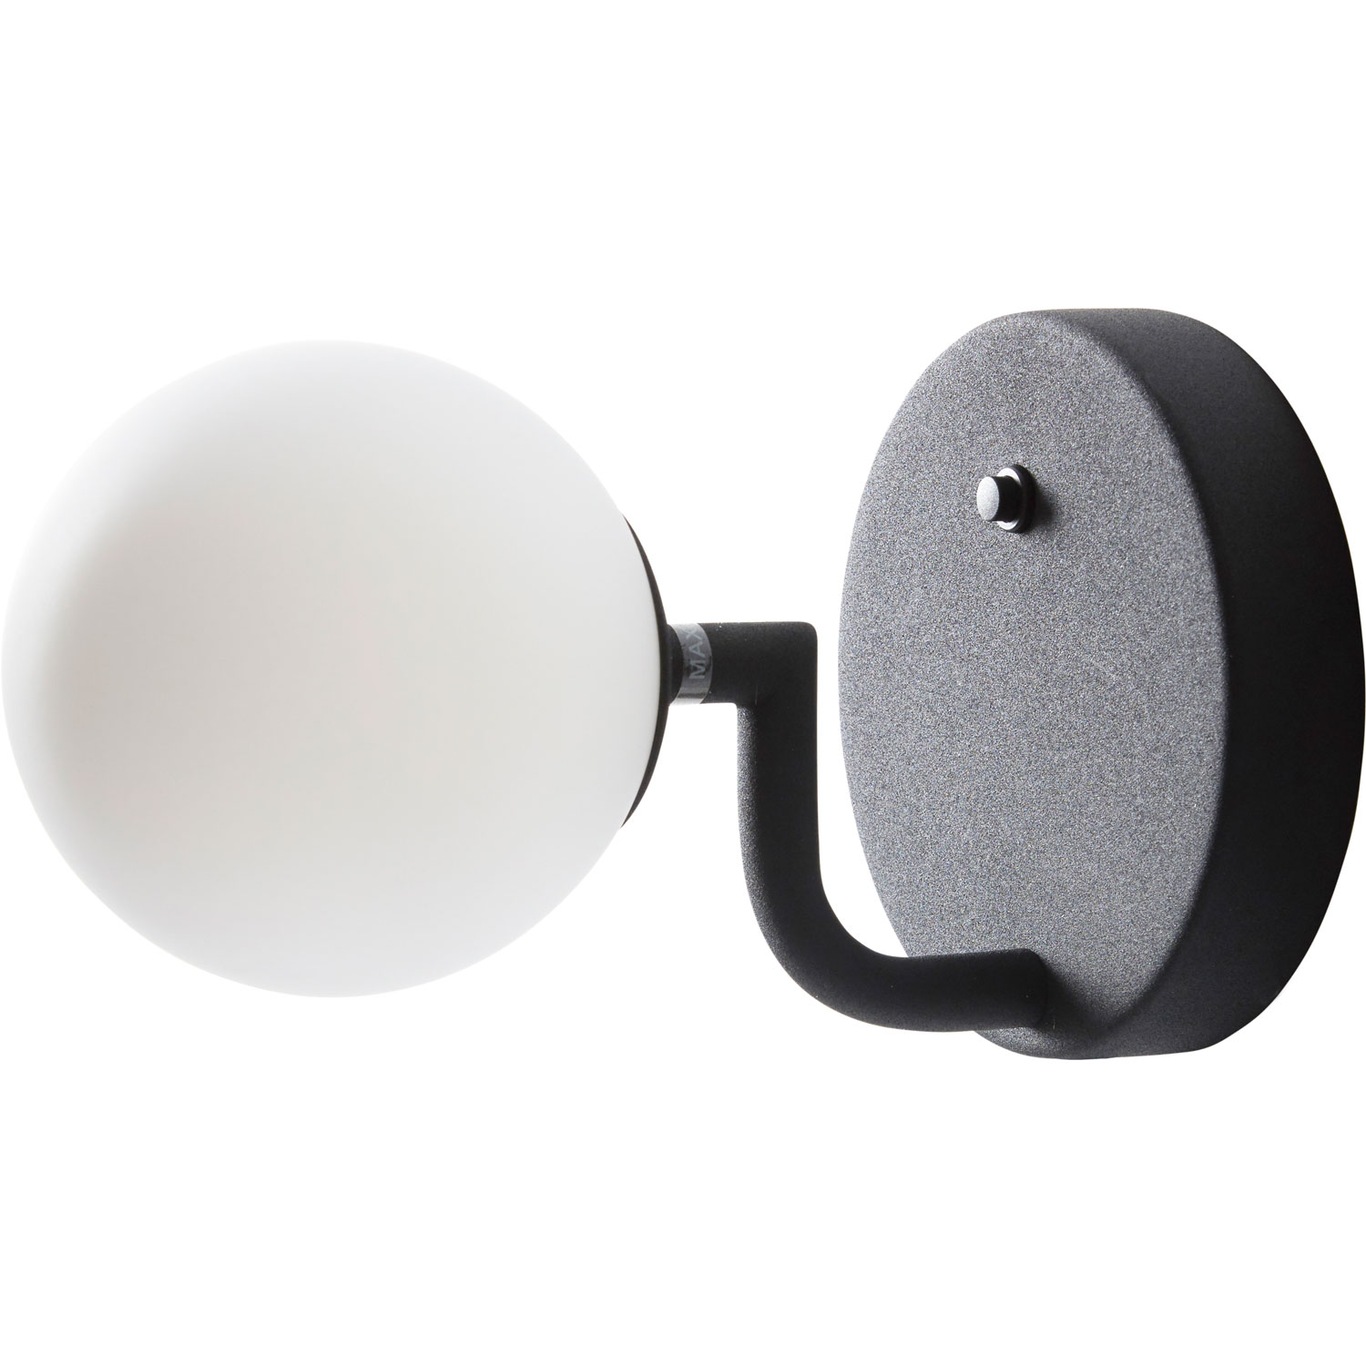 Mobil 12 Wall Lamp Fixed Installation, Black